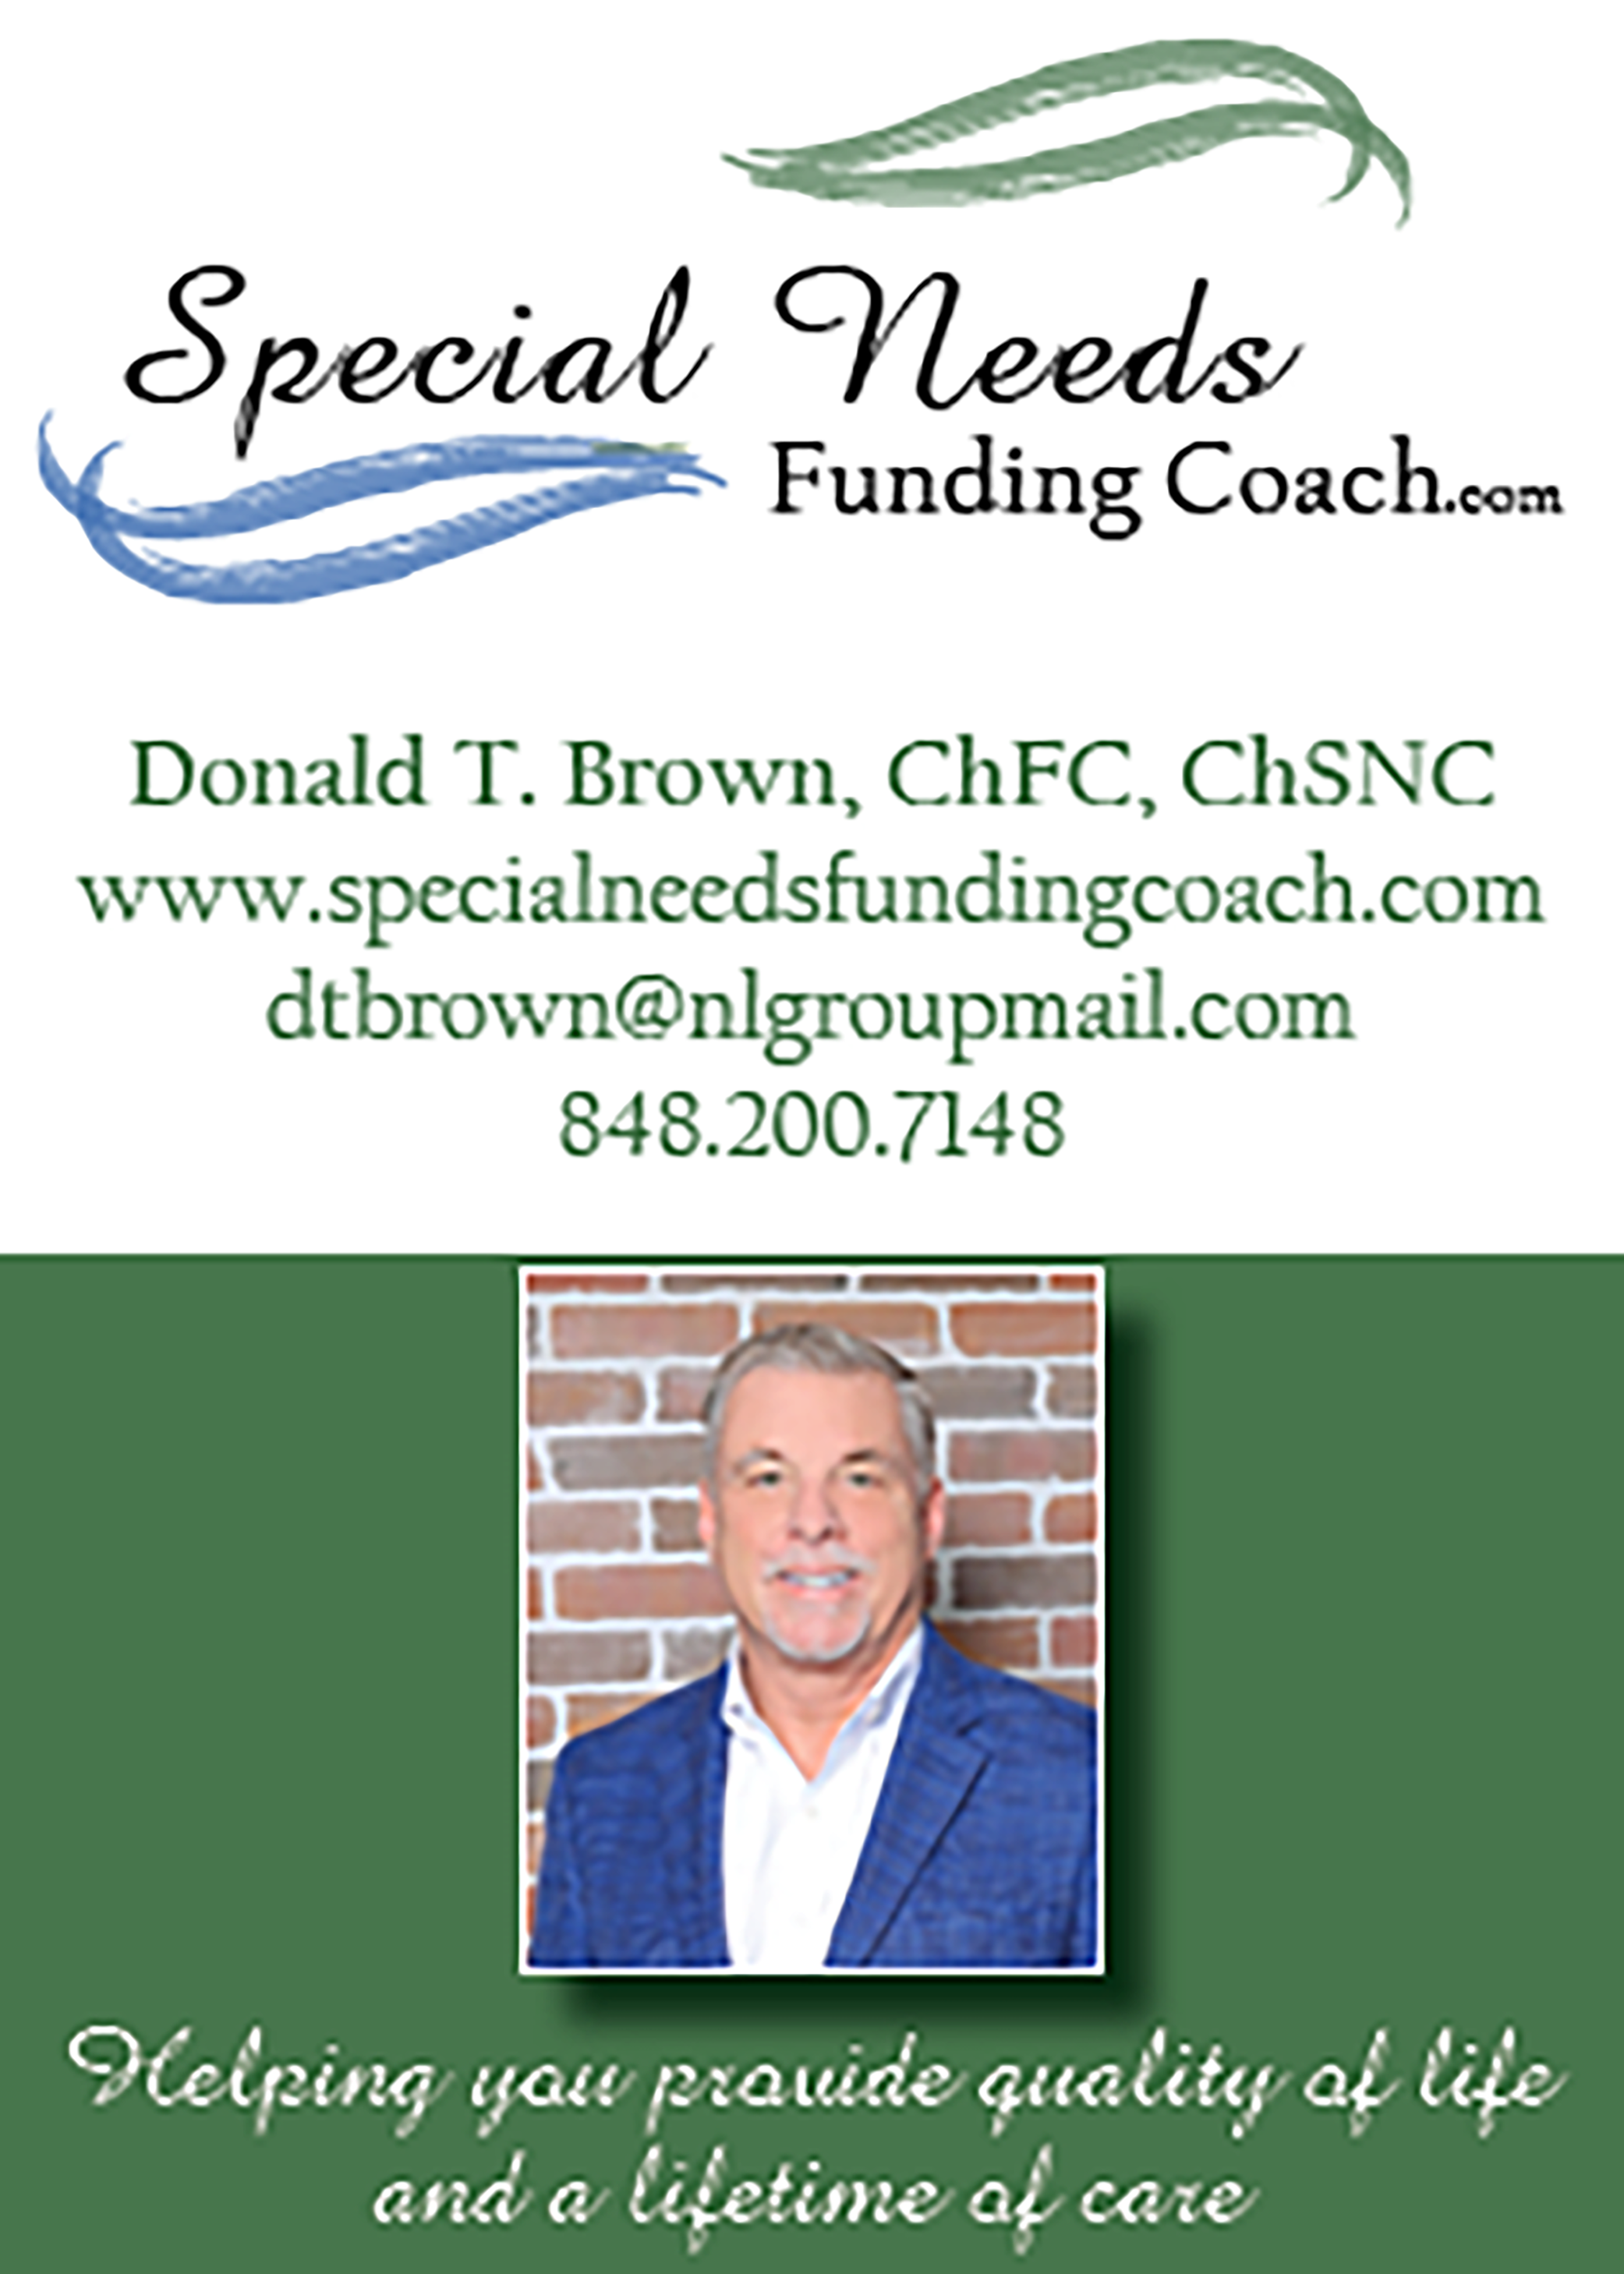 Special Needs Funding Coach 250 x 350